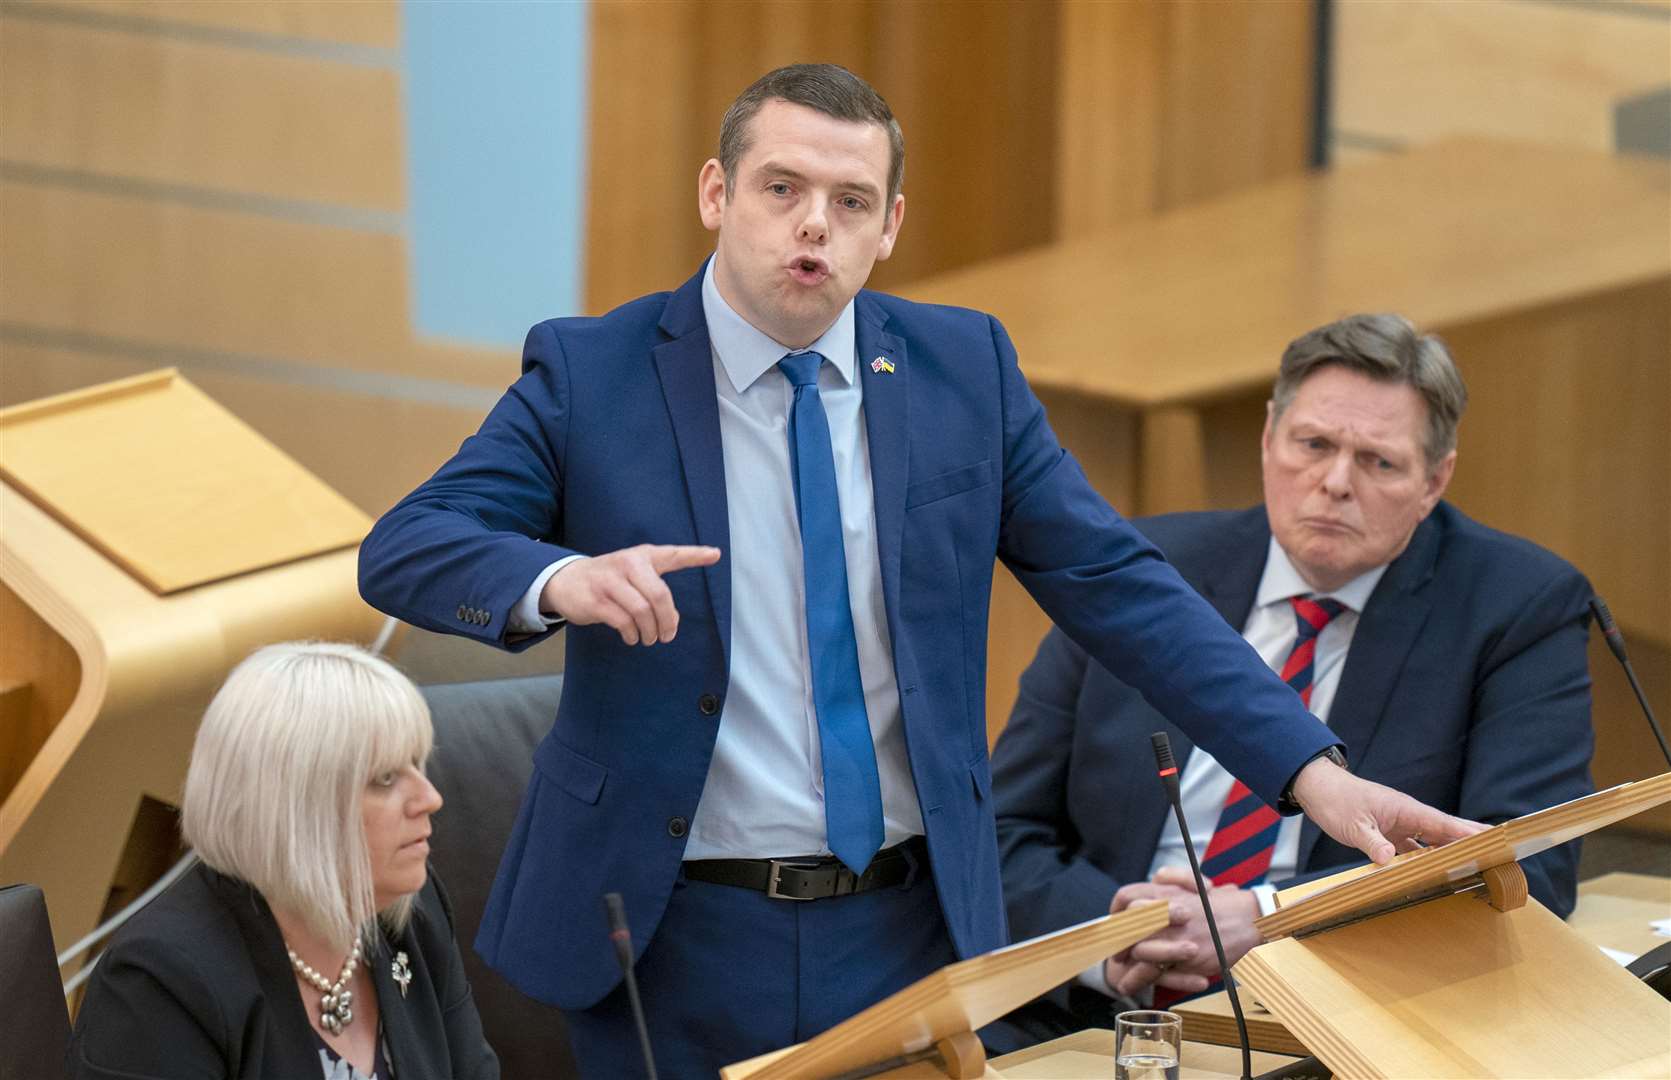 Douglas Ross said the Scottish Government’s priorities are ‘all wrong’ (Jane Barlow/PA)